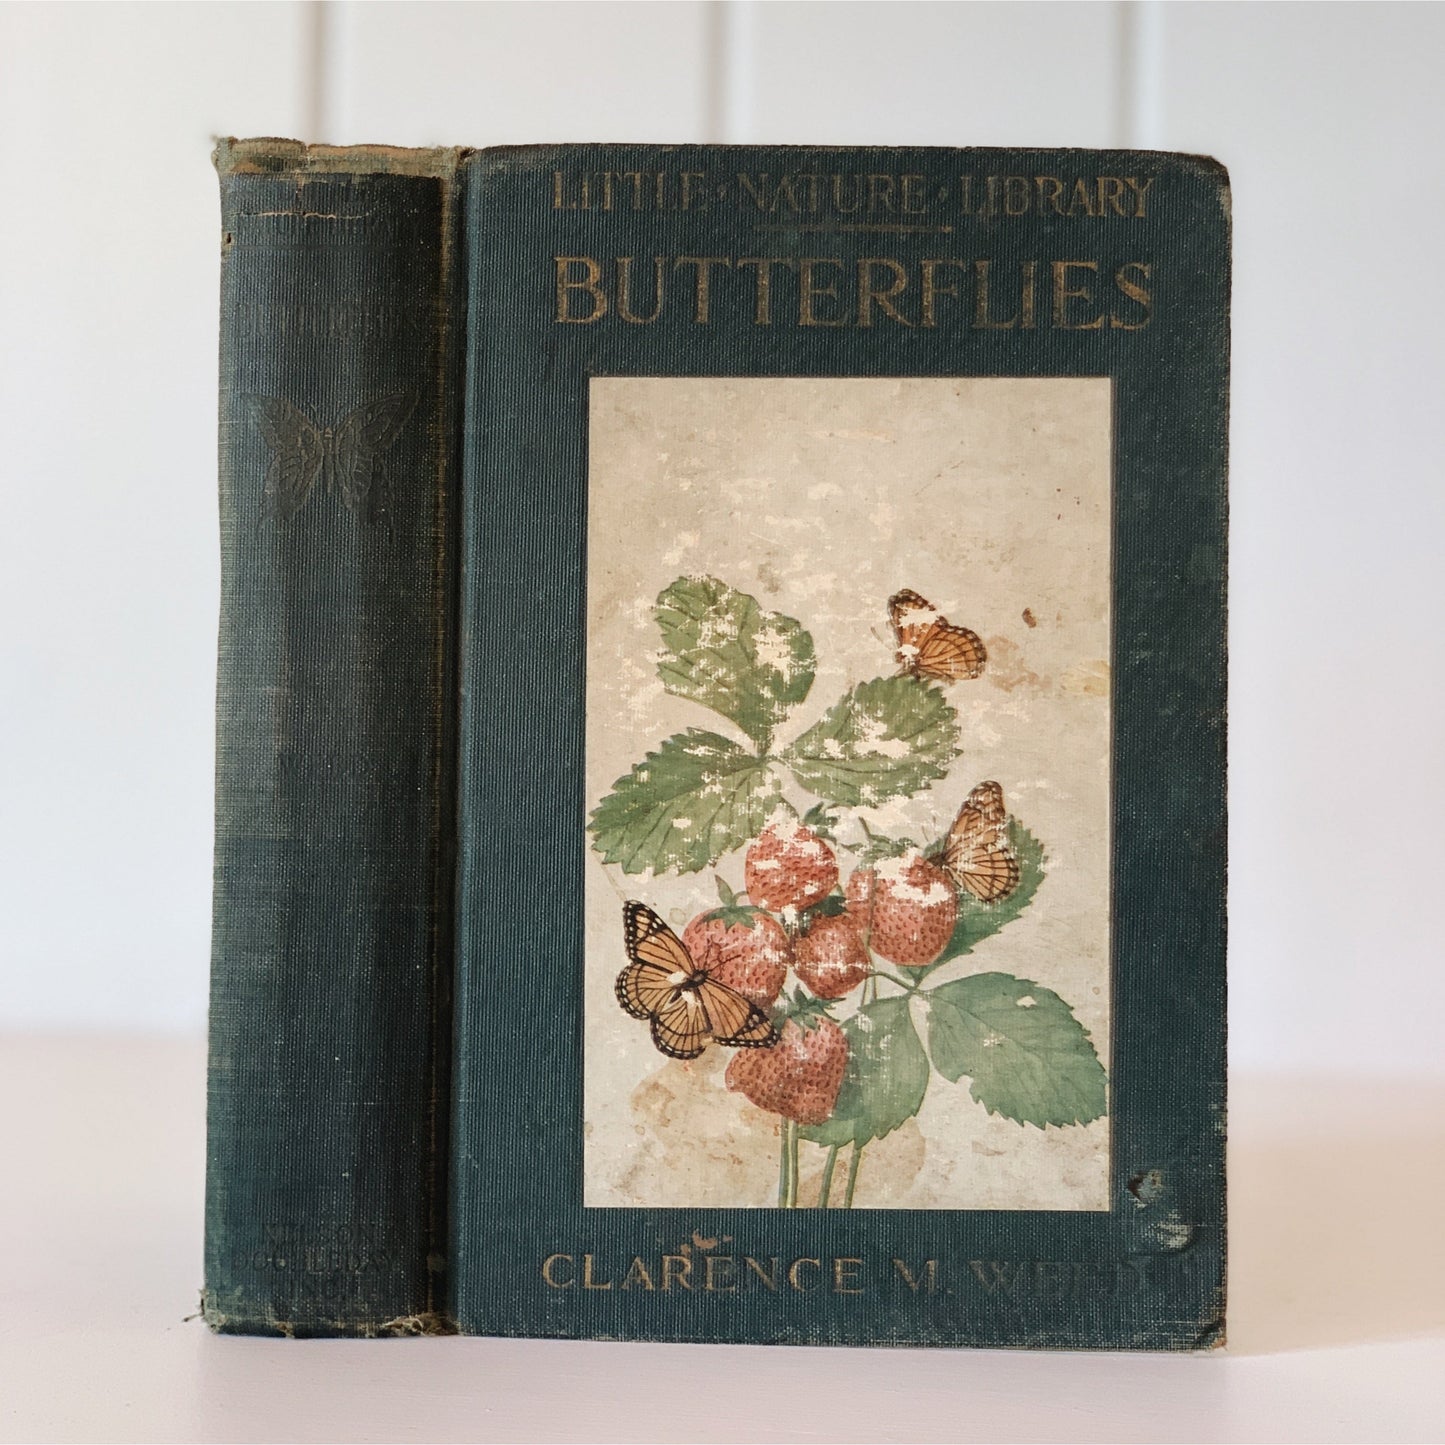 Little Nature Library - Butterflies - Clarence M. Weed - 1922